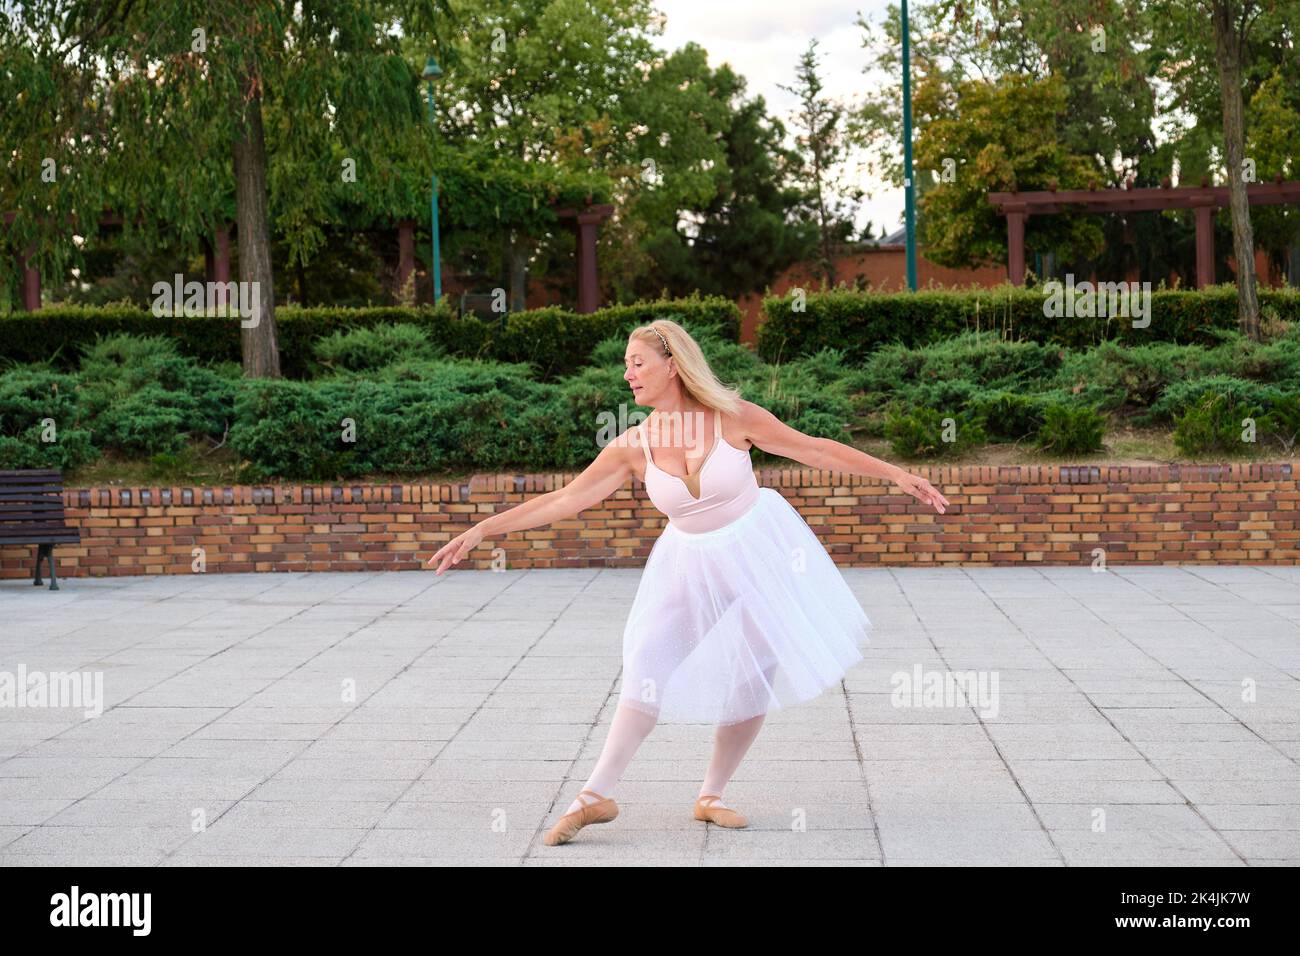 Lady dancing ballet in a park at street. Stock Photo